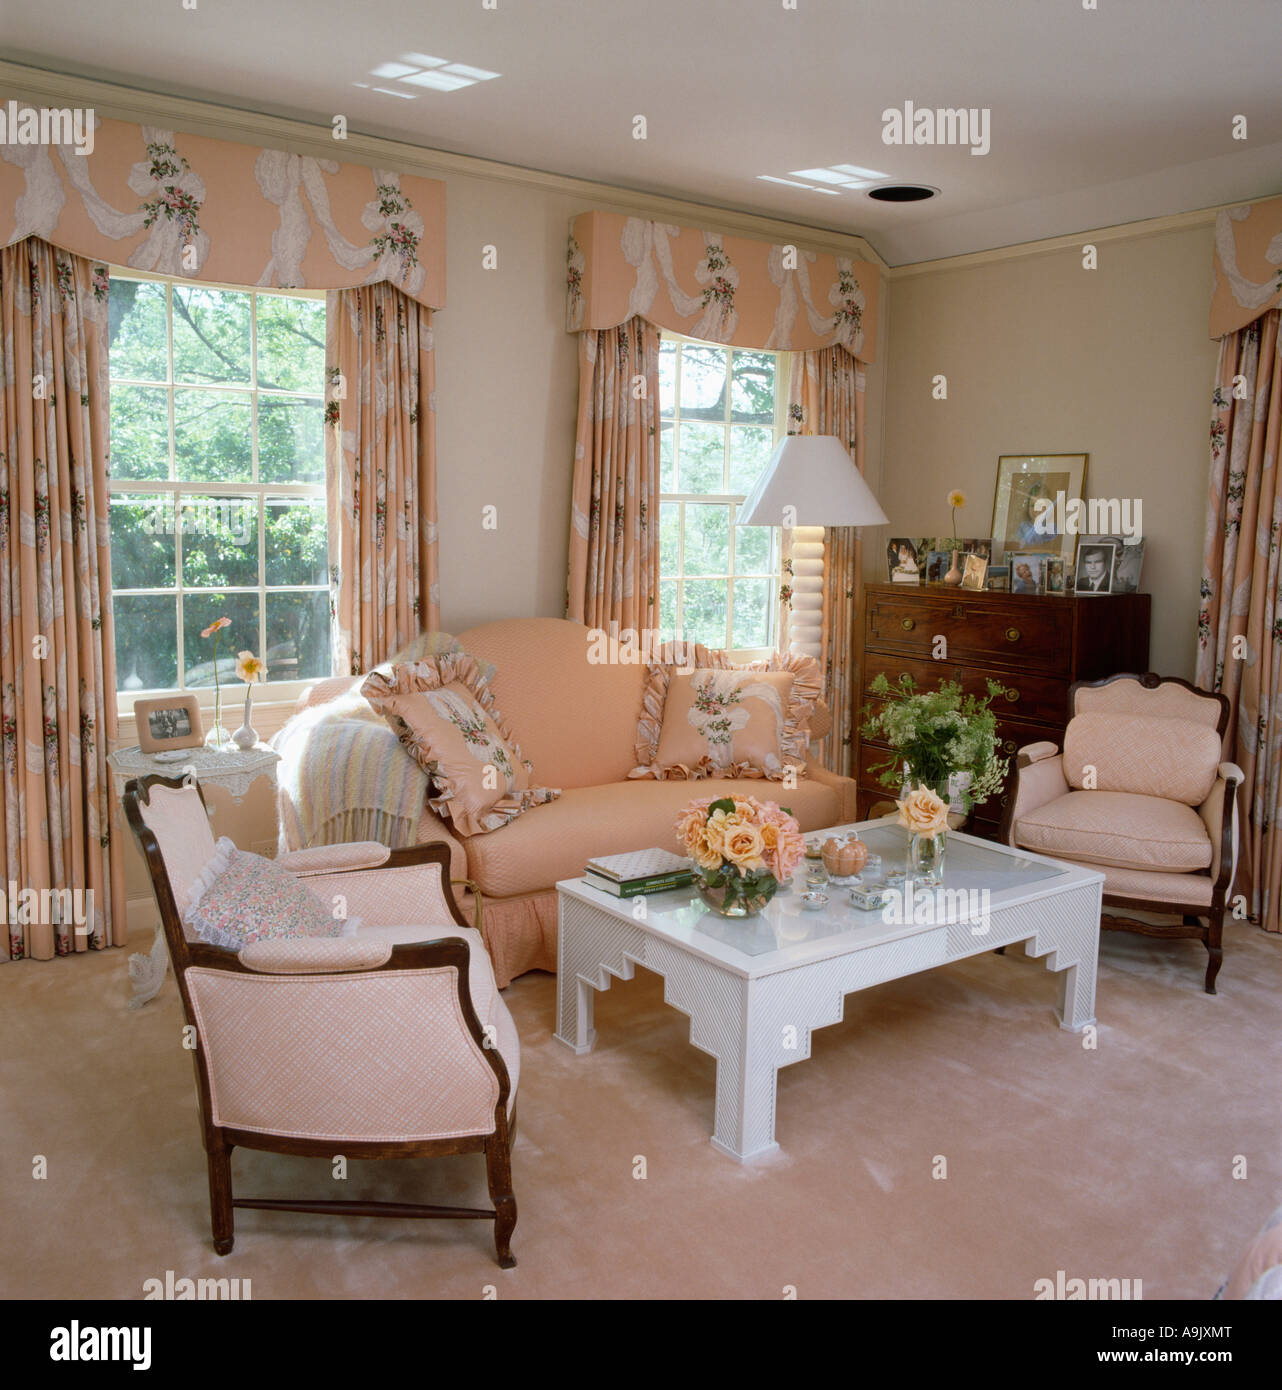 Peach sofa and patterned curtains with pelmets in peach eighties livingroom  with white table and peach carpet Stock Photo - Alamy